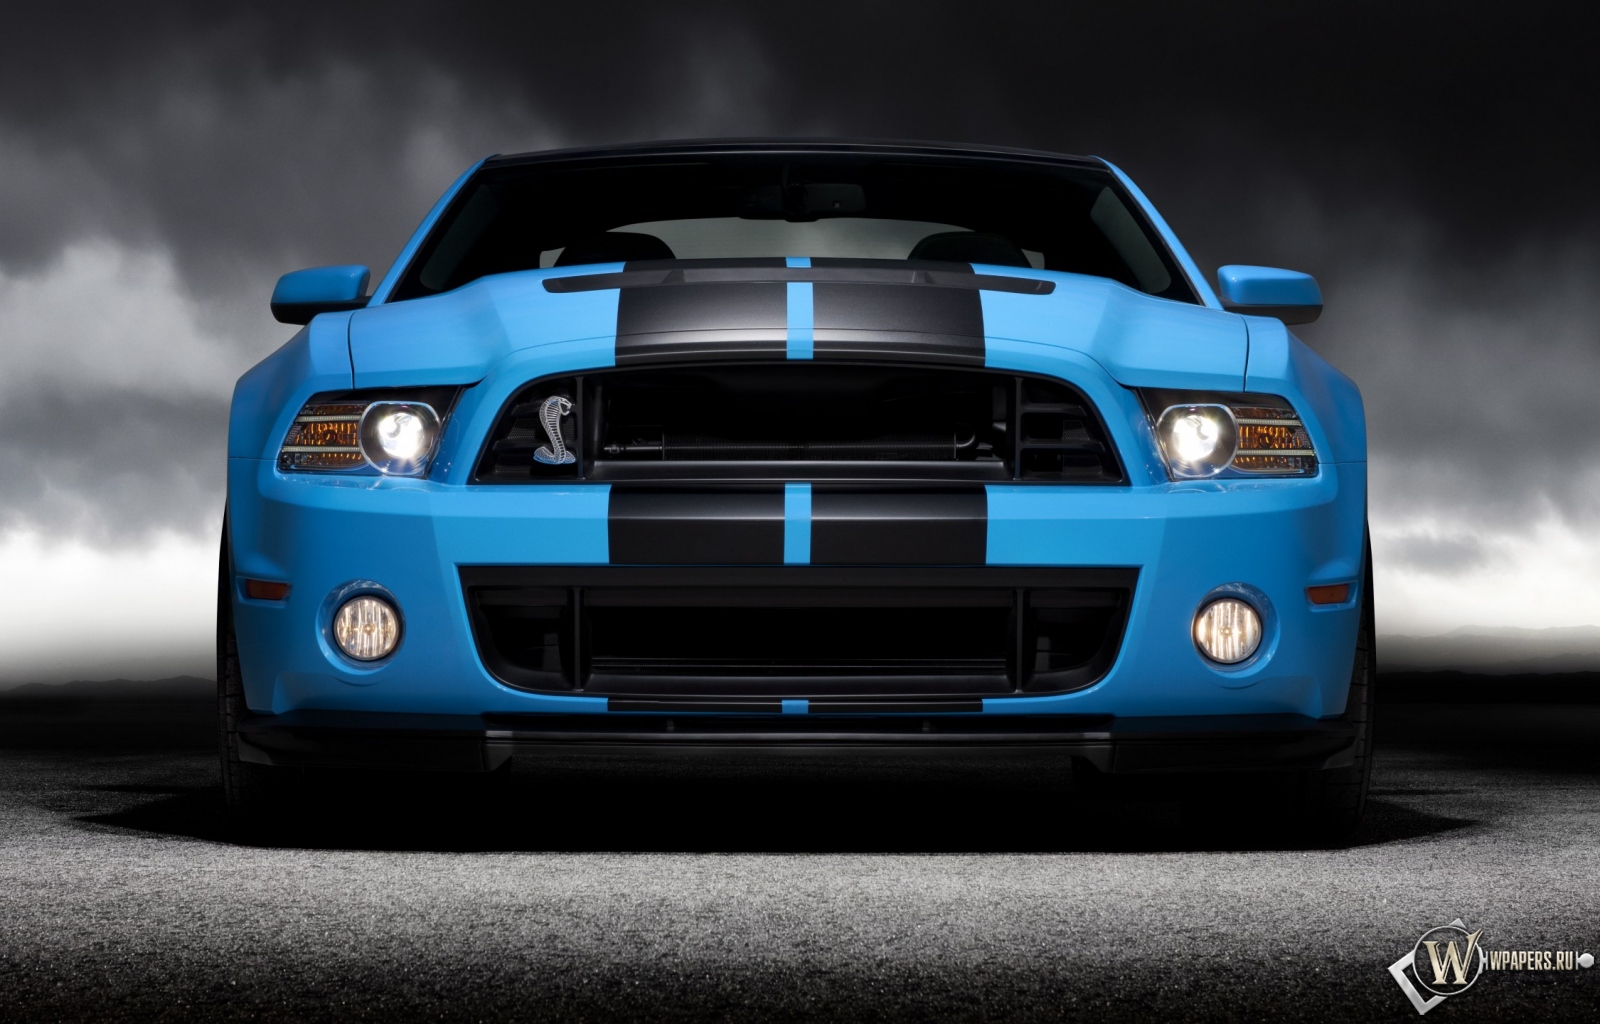 2013 Ford Mustang Shelby GT500 1600x1024